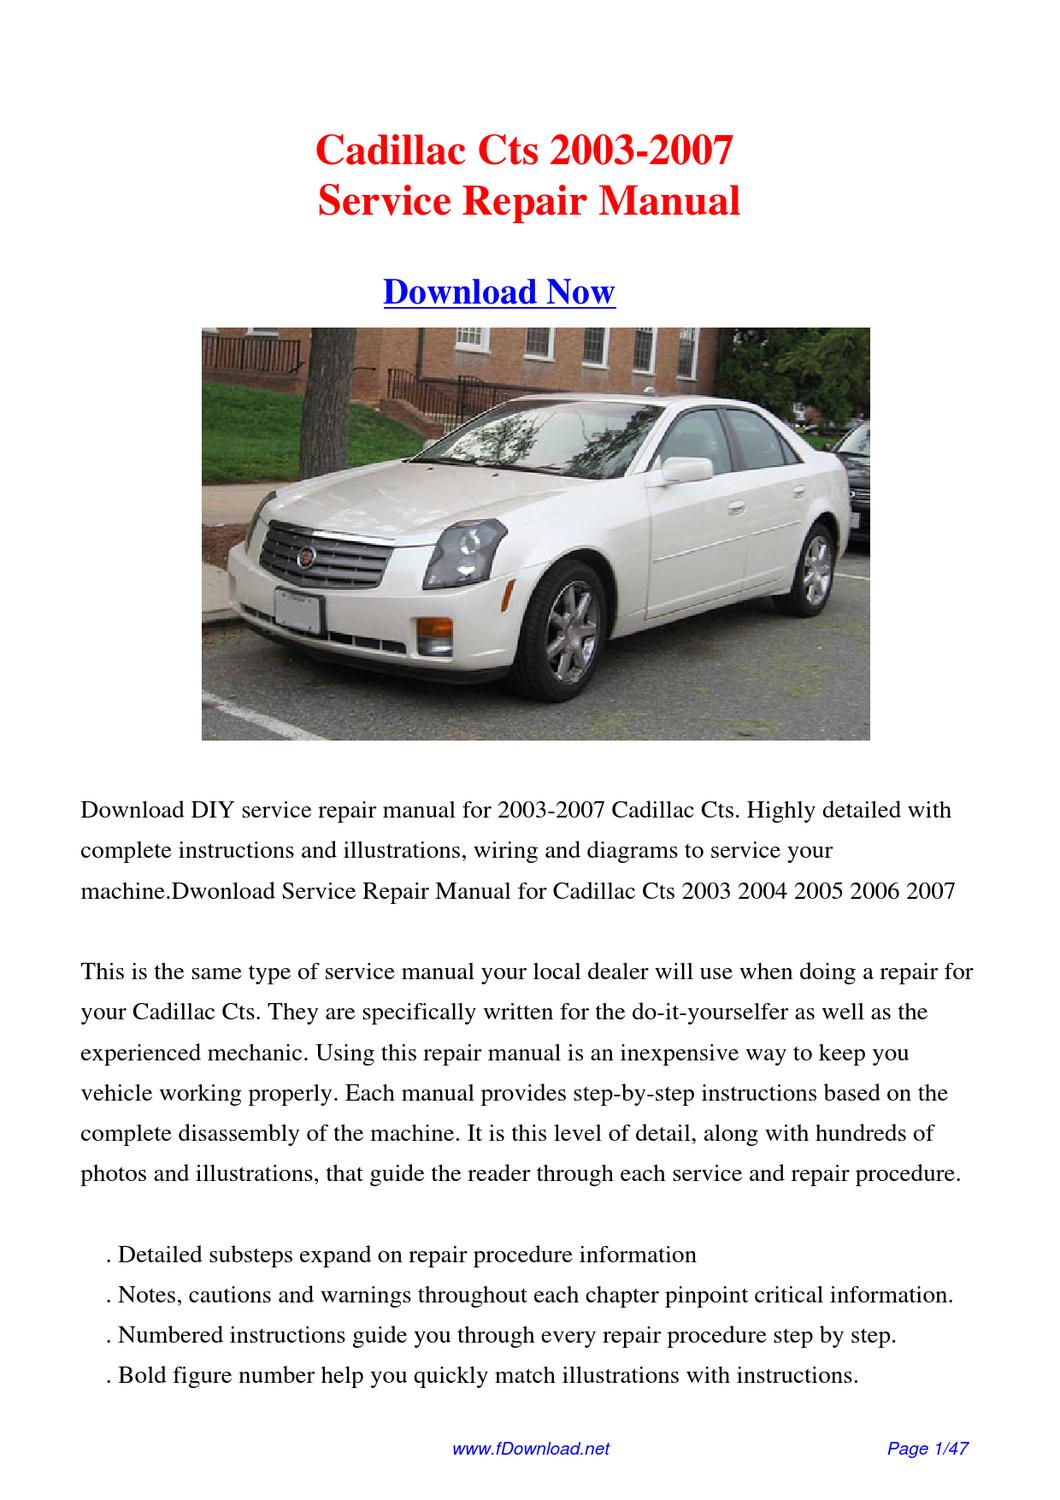 Cadillac cts manual for sale